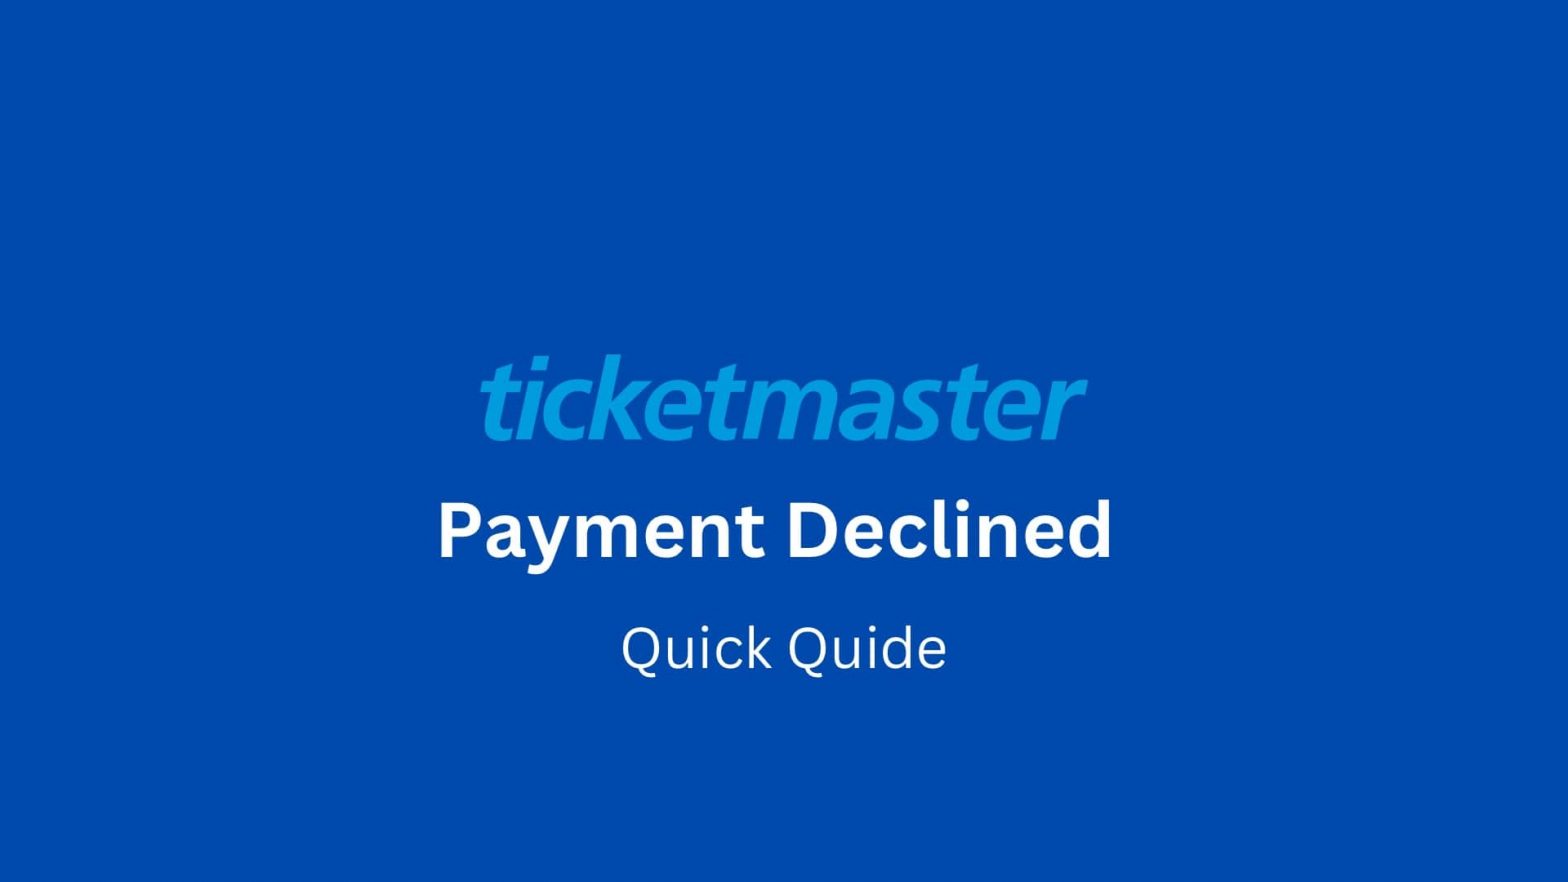 Ticketmaster payment declined